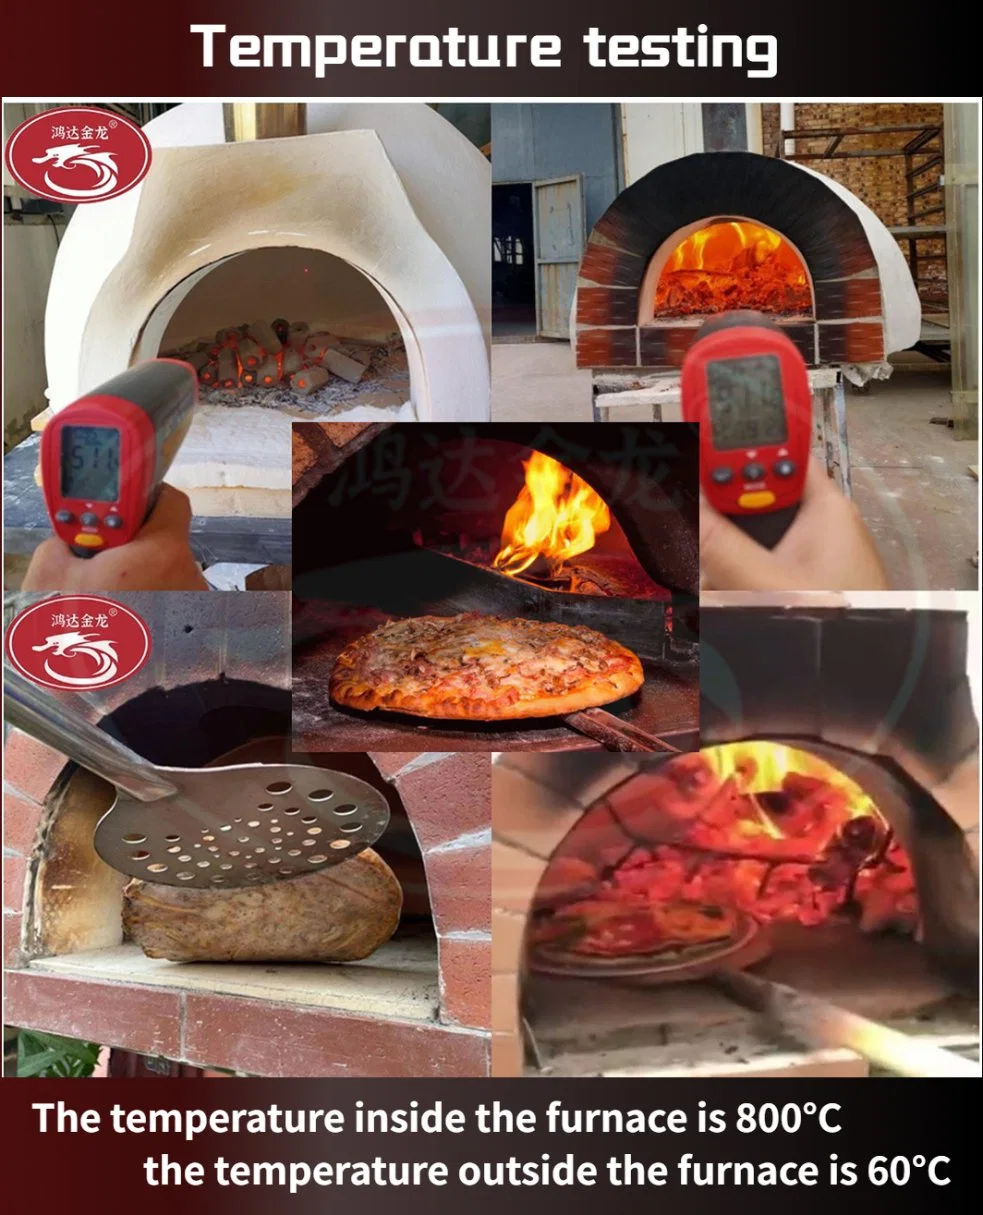 Pizza Oven Outdoor Pellet Grill Fire Wood BBQ Smoker Pizza Oven